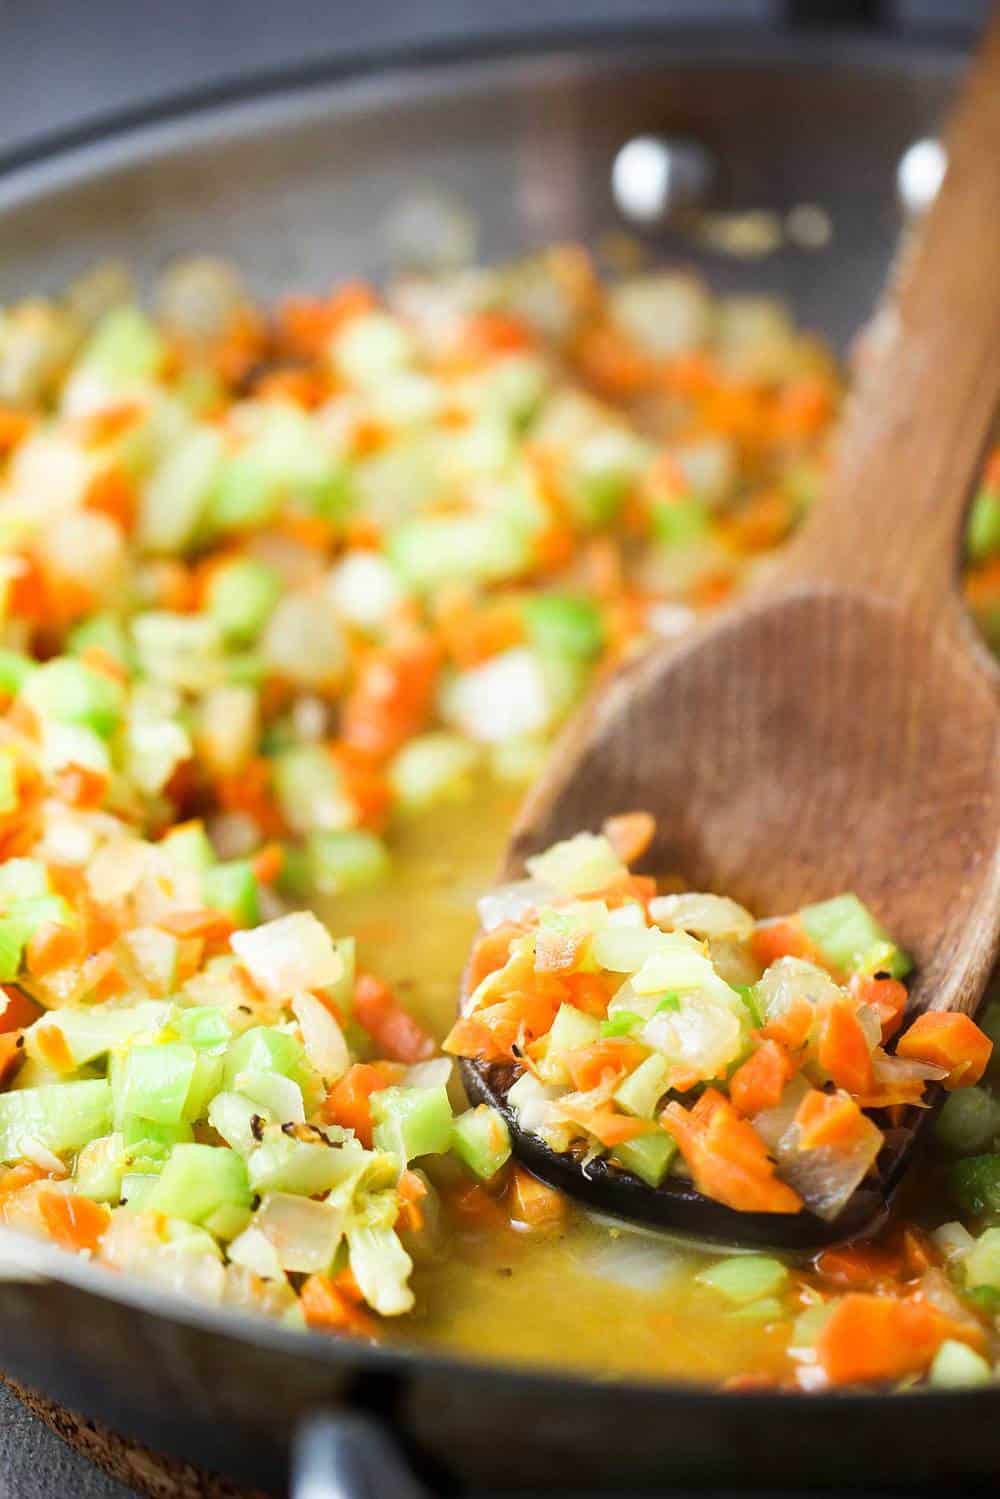 Carrots, onions and celery sautéing in a skillet with a wooden spoon